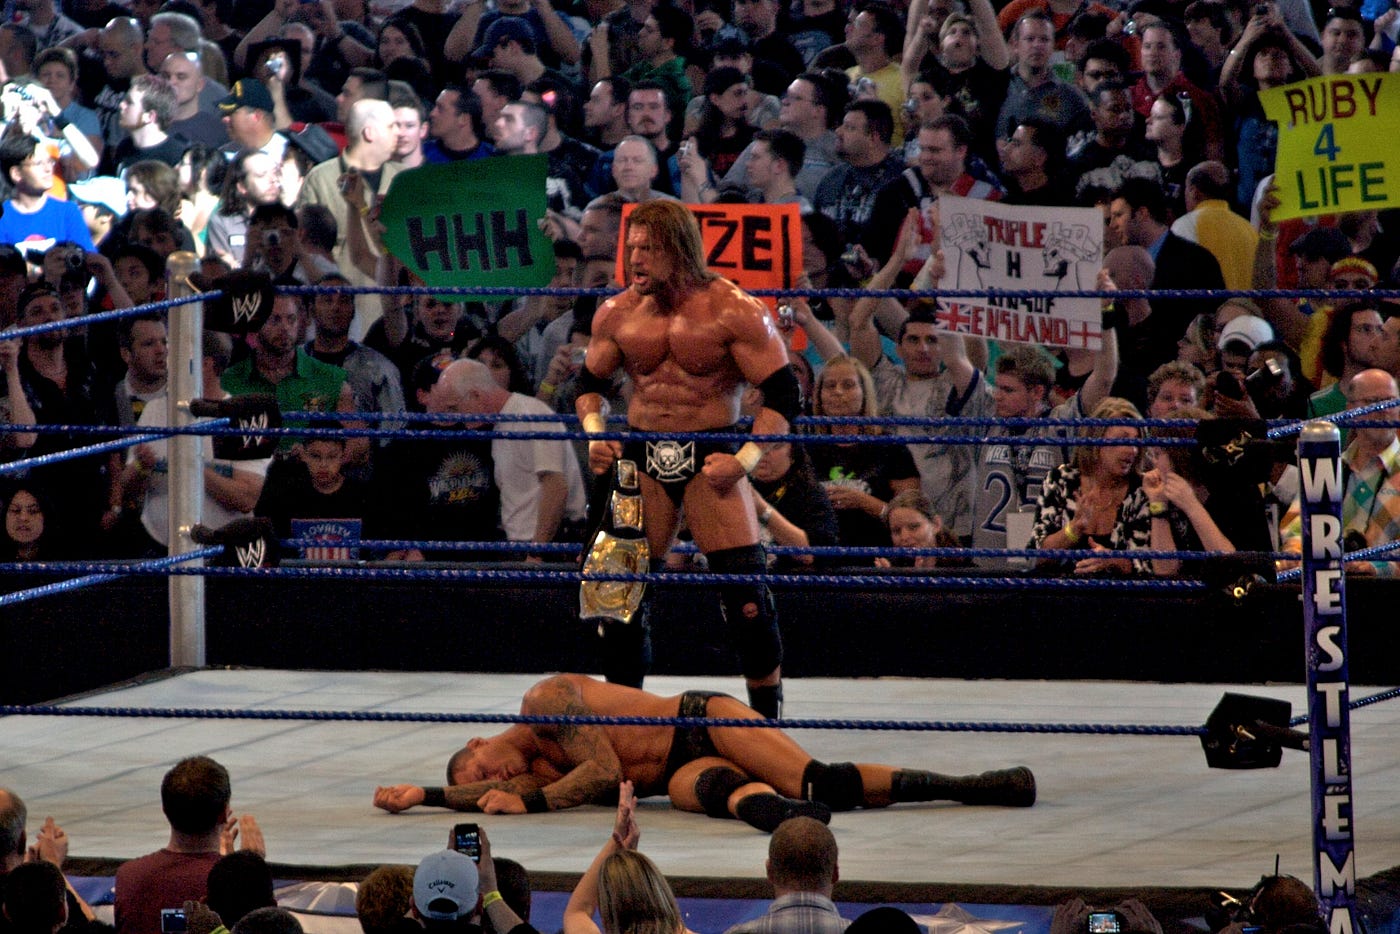 Top 300 WWE Superstars of the WrestleMania Years | by Mike Chin | Medium